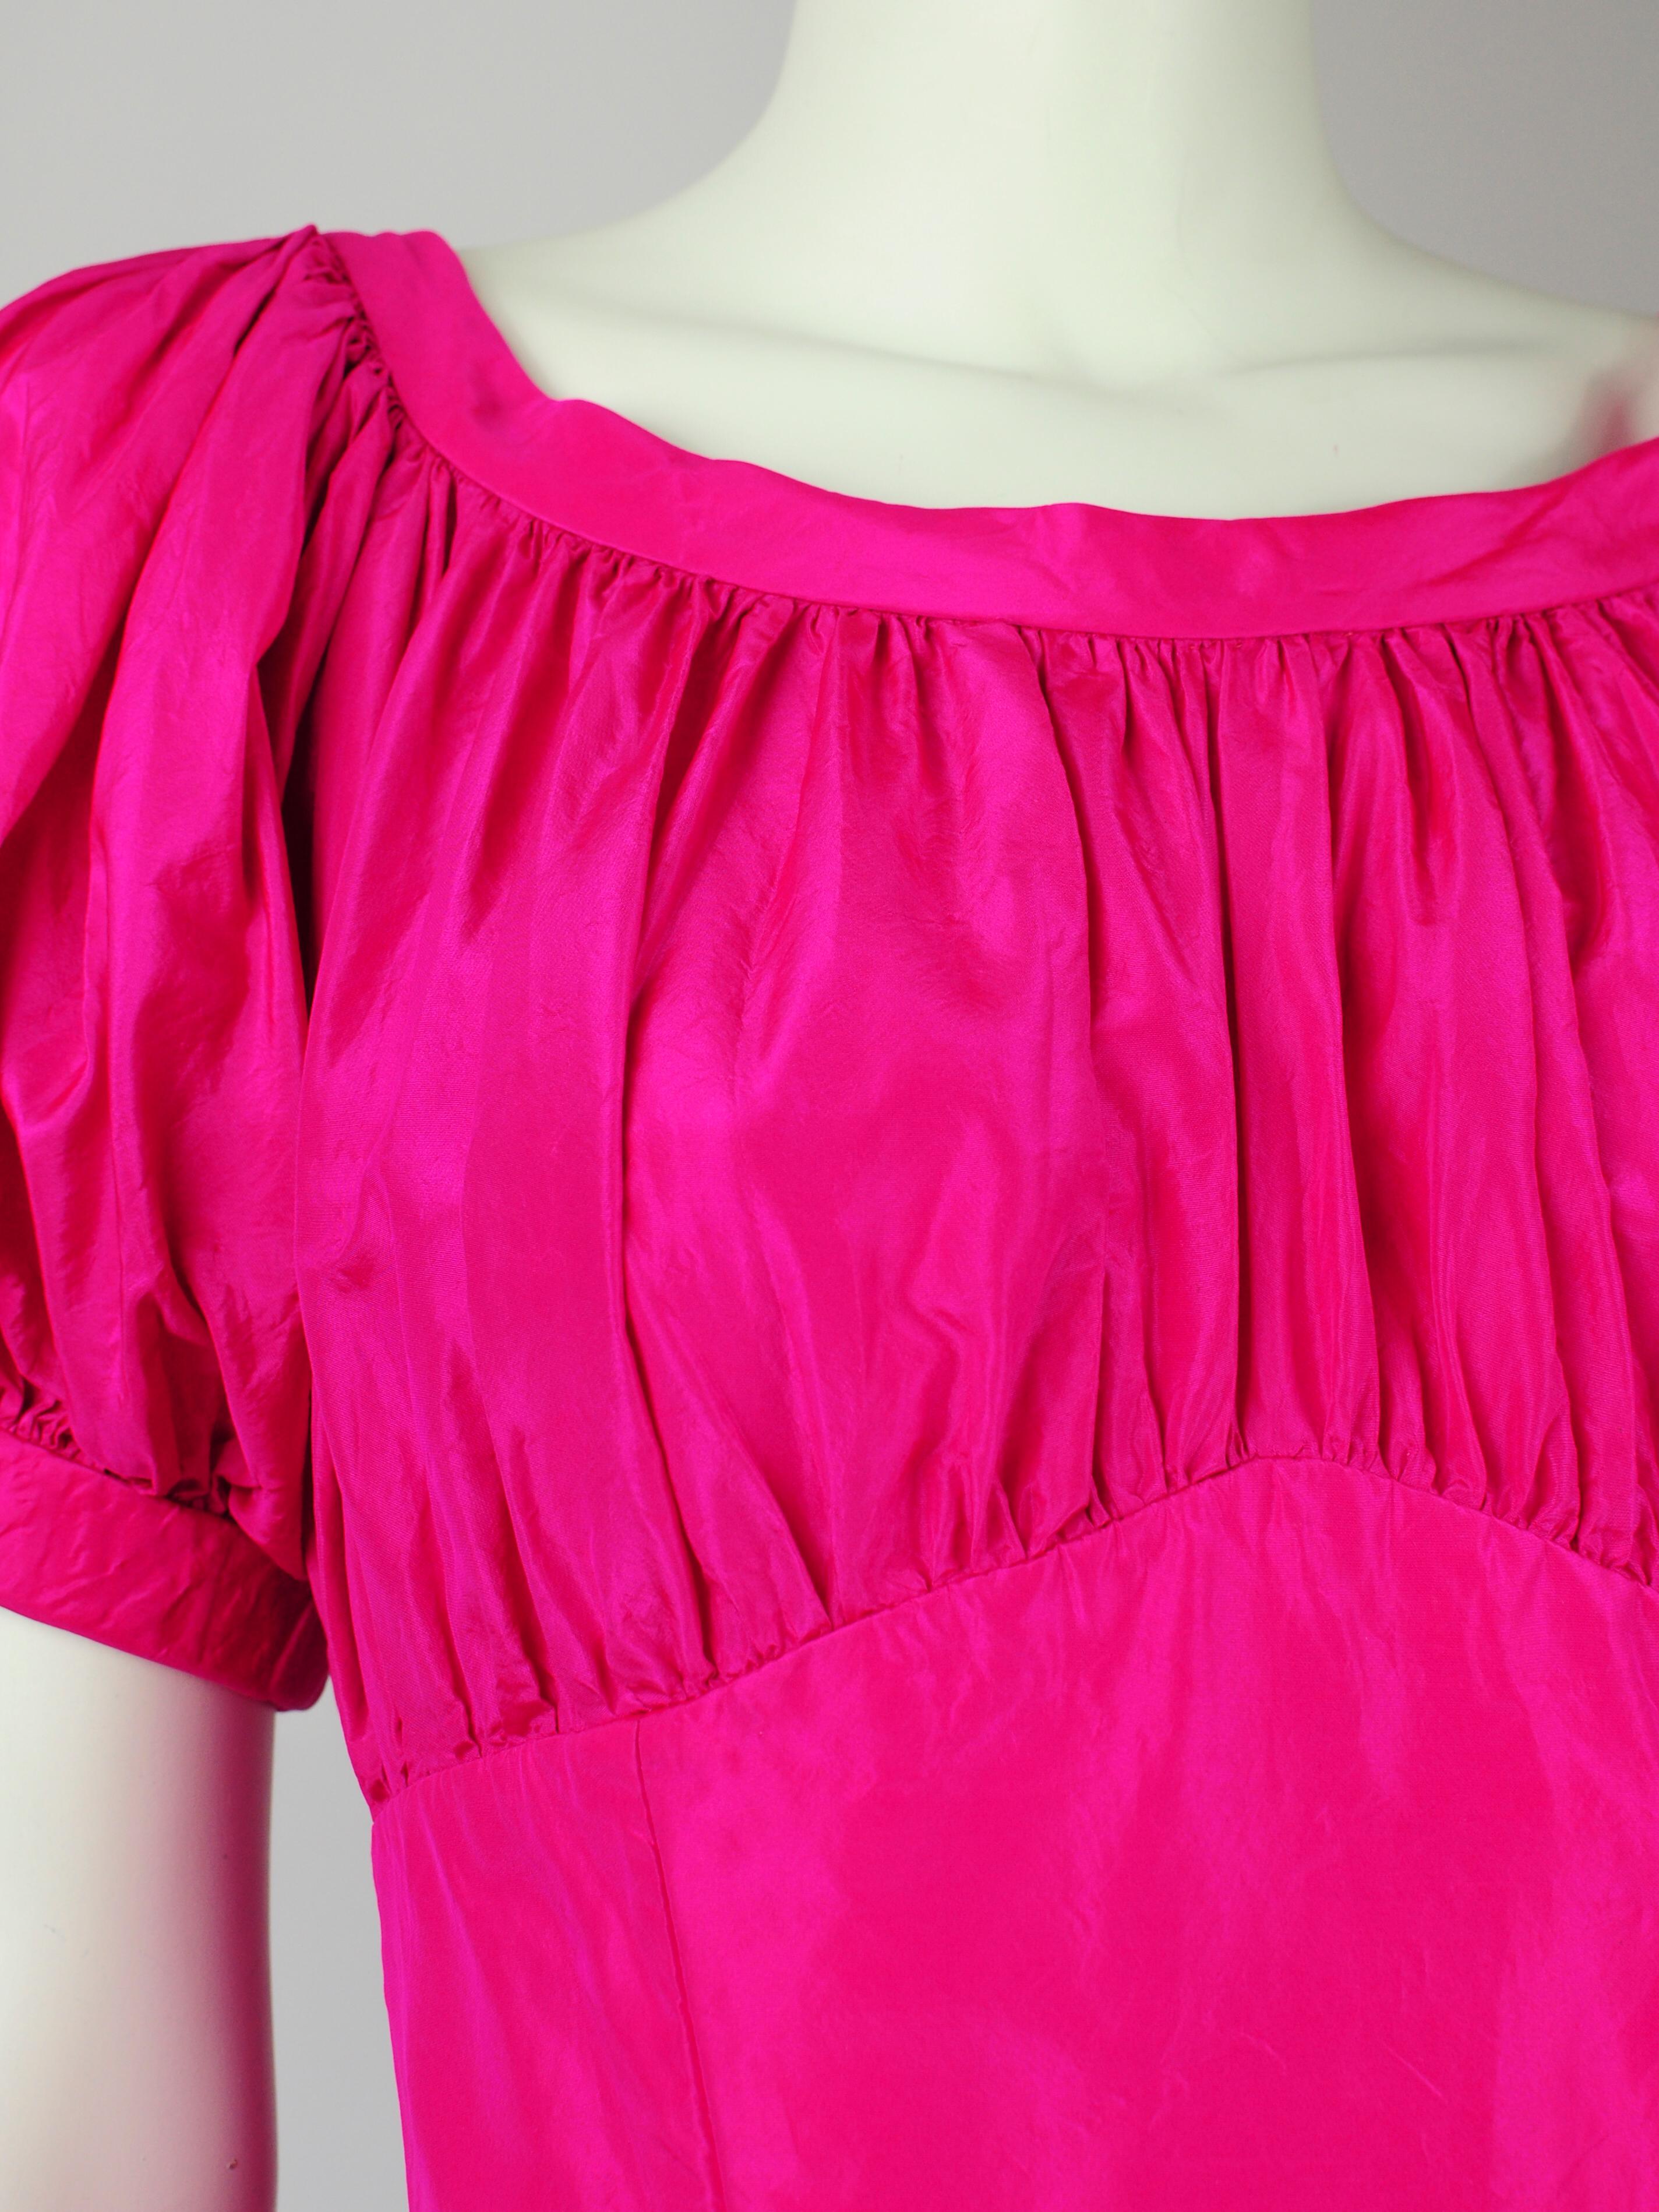 Women's Vicky Tiel Couture Cocktail Dress Fuchsia Pink Silk Ruffles 1990s For Sale